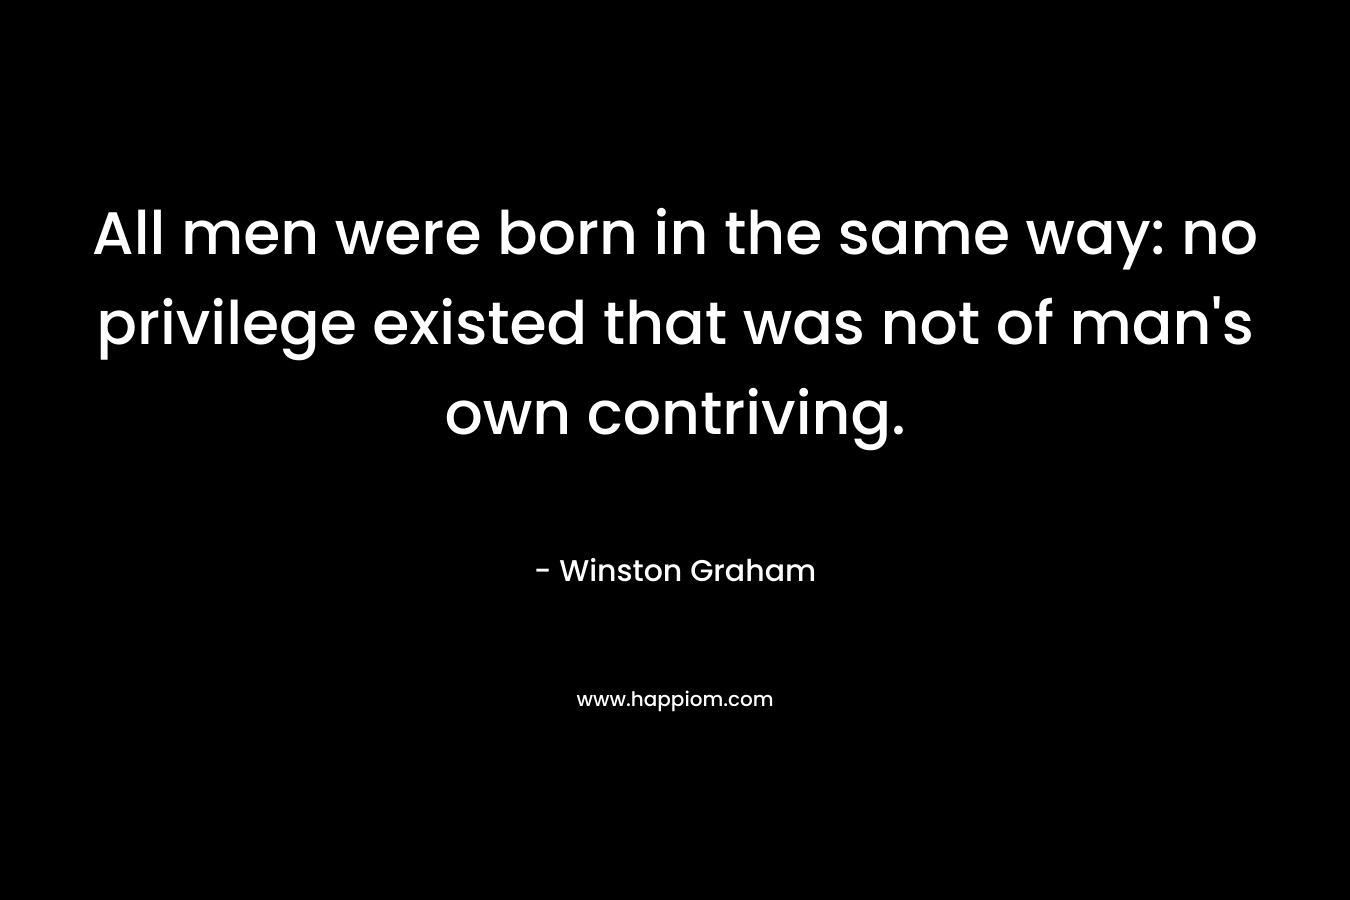 All men were born in the same way: no privilege existed that was not of man’s own contriving. – Winston Graham